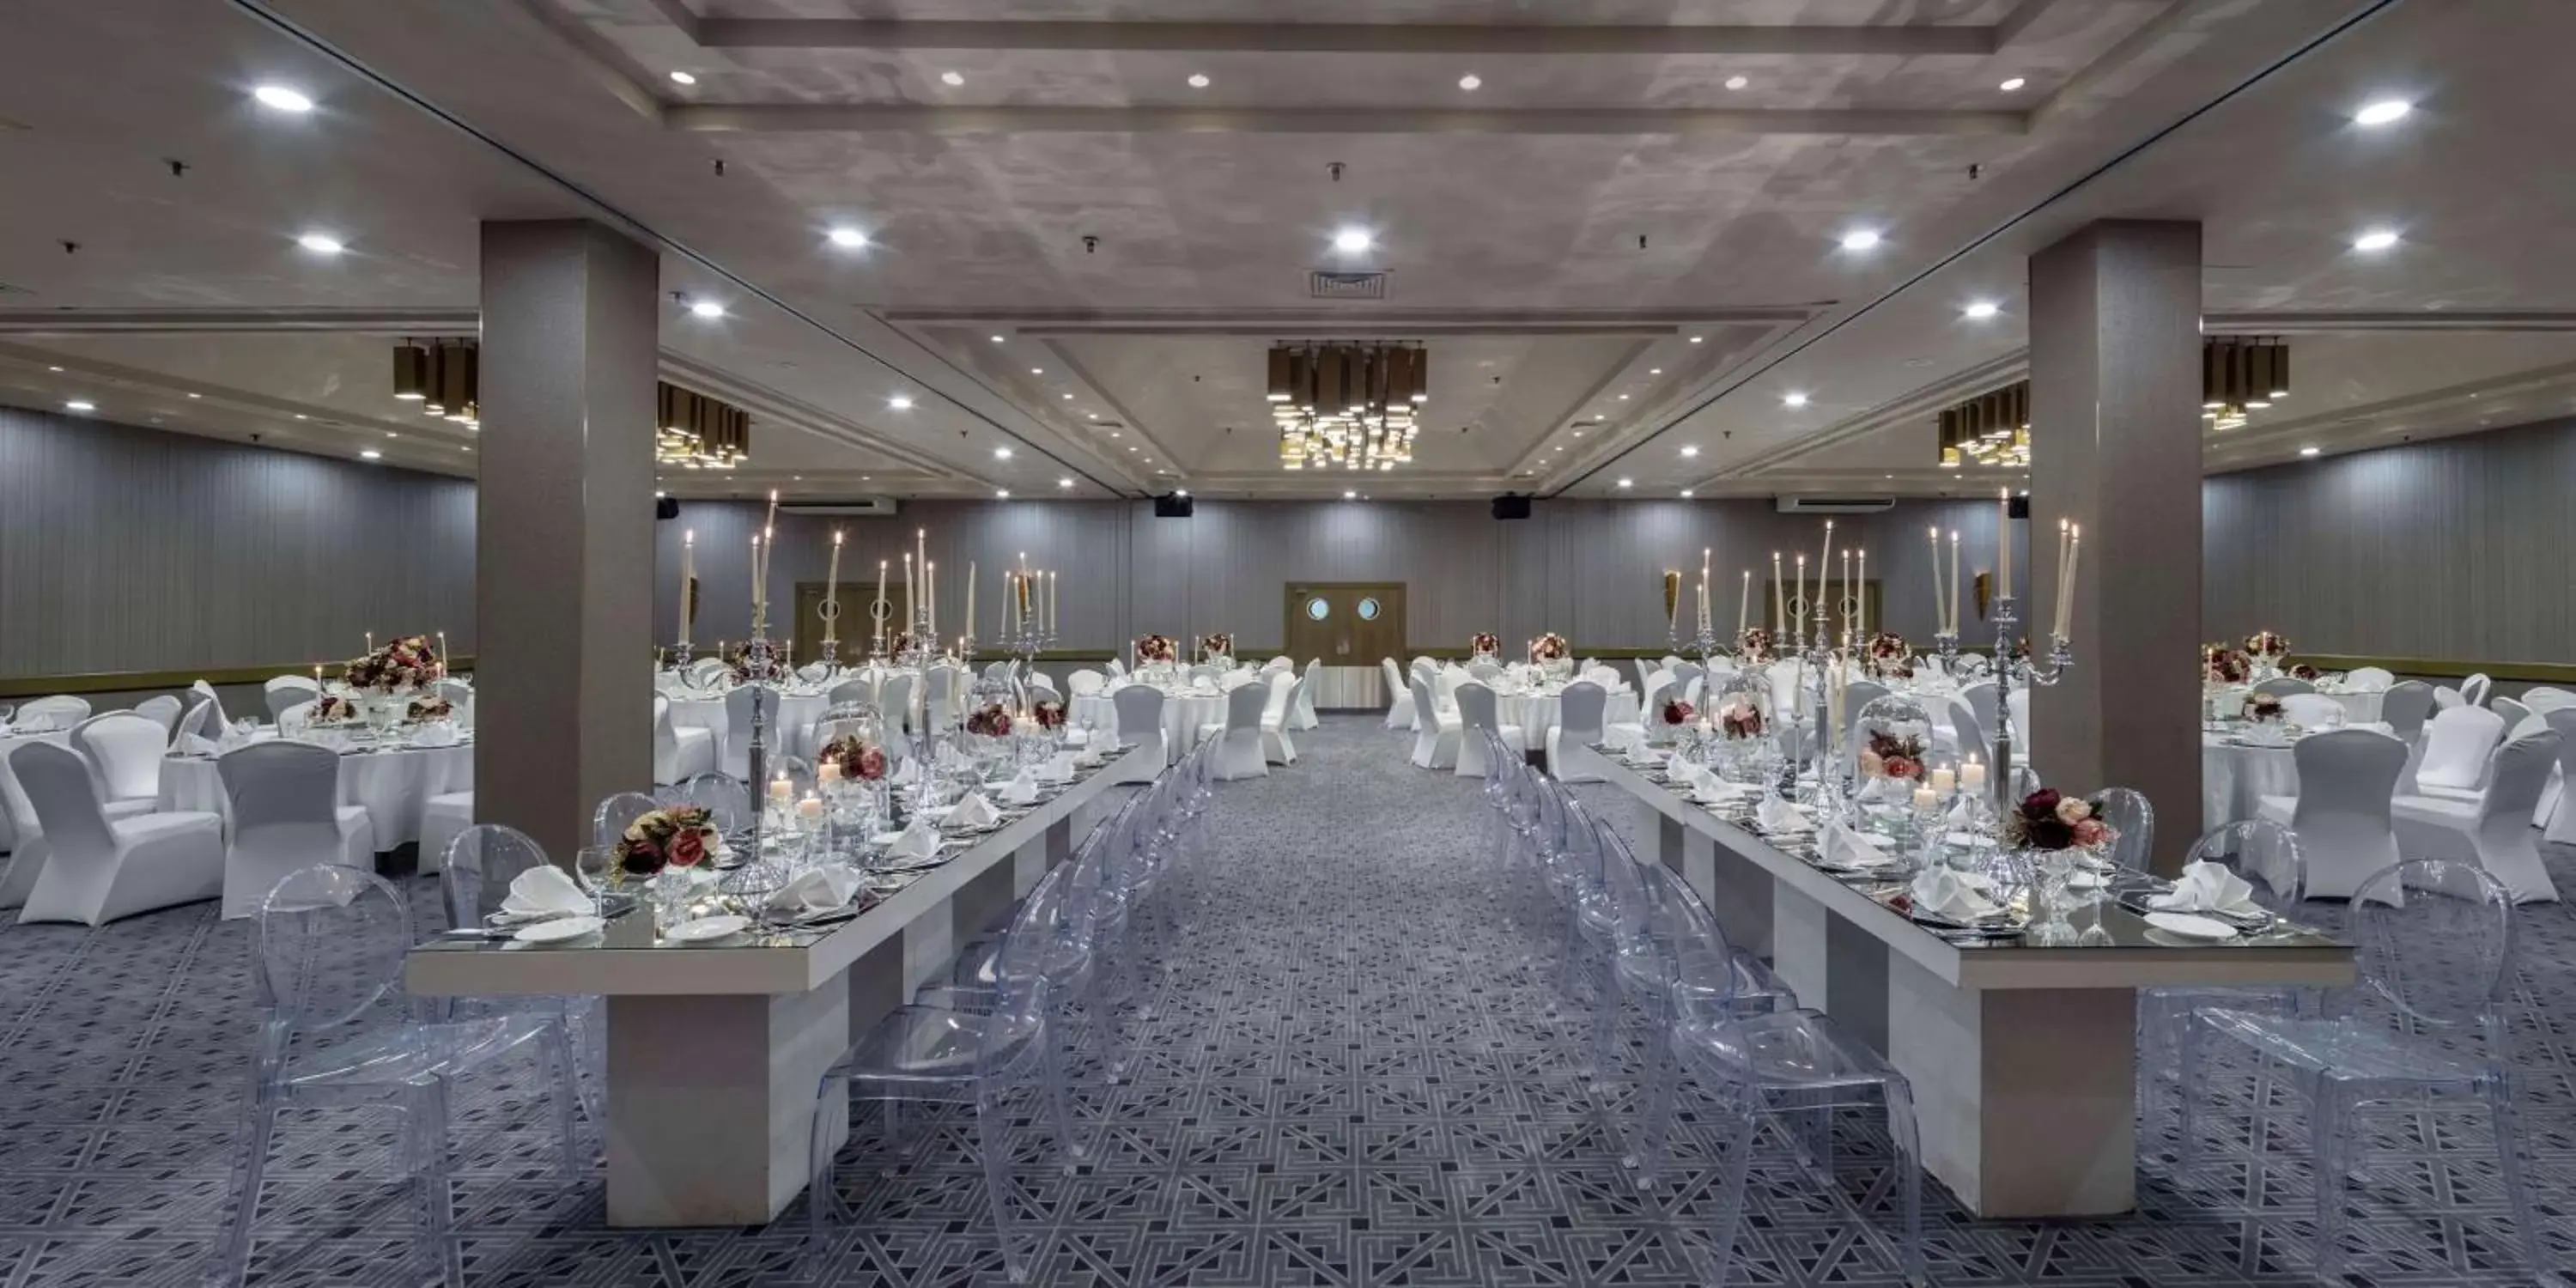 Meeting/conference room, Banquet Facilities in Mersin HiltonSA